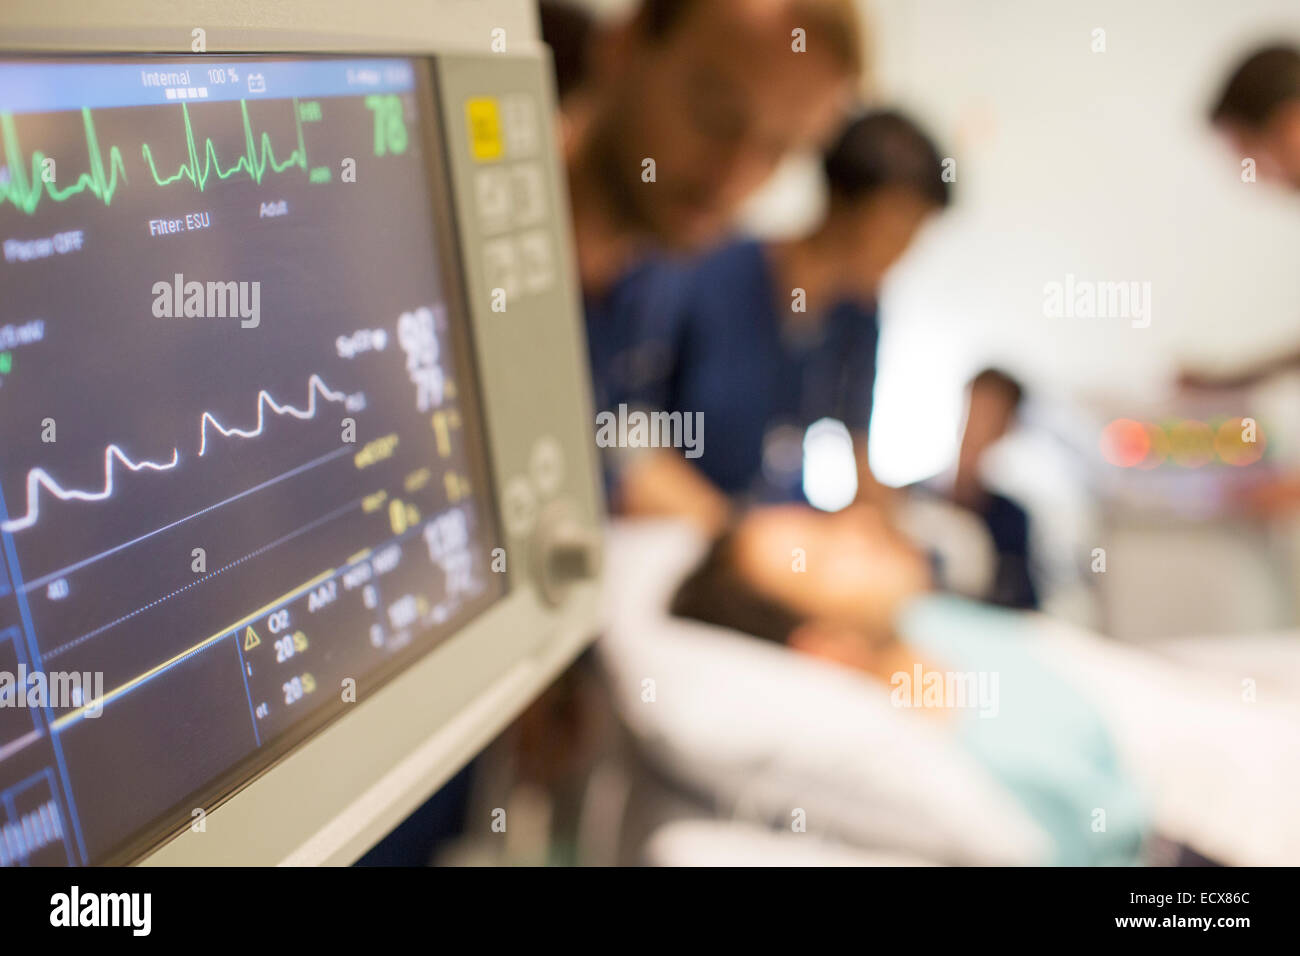 Heart rate monitor, patient and doctors in background in intensive care unit Stock Photo